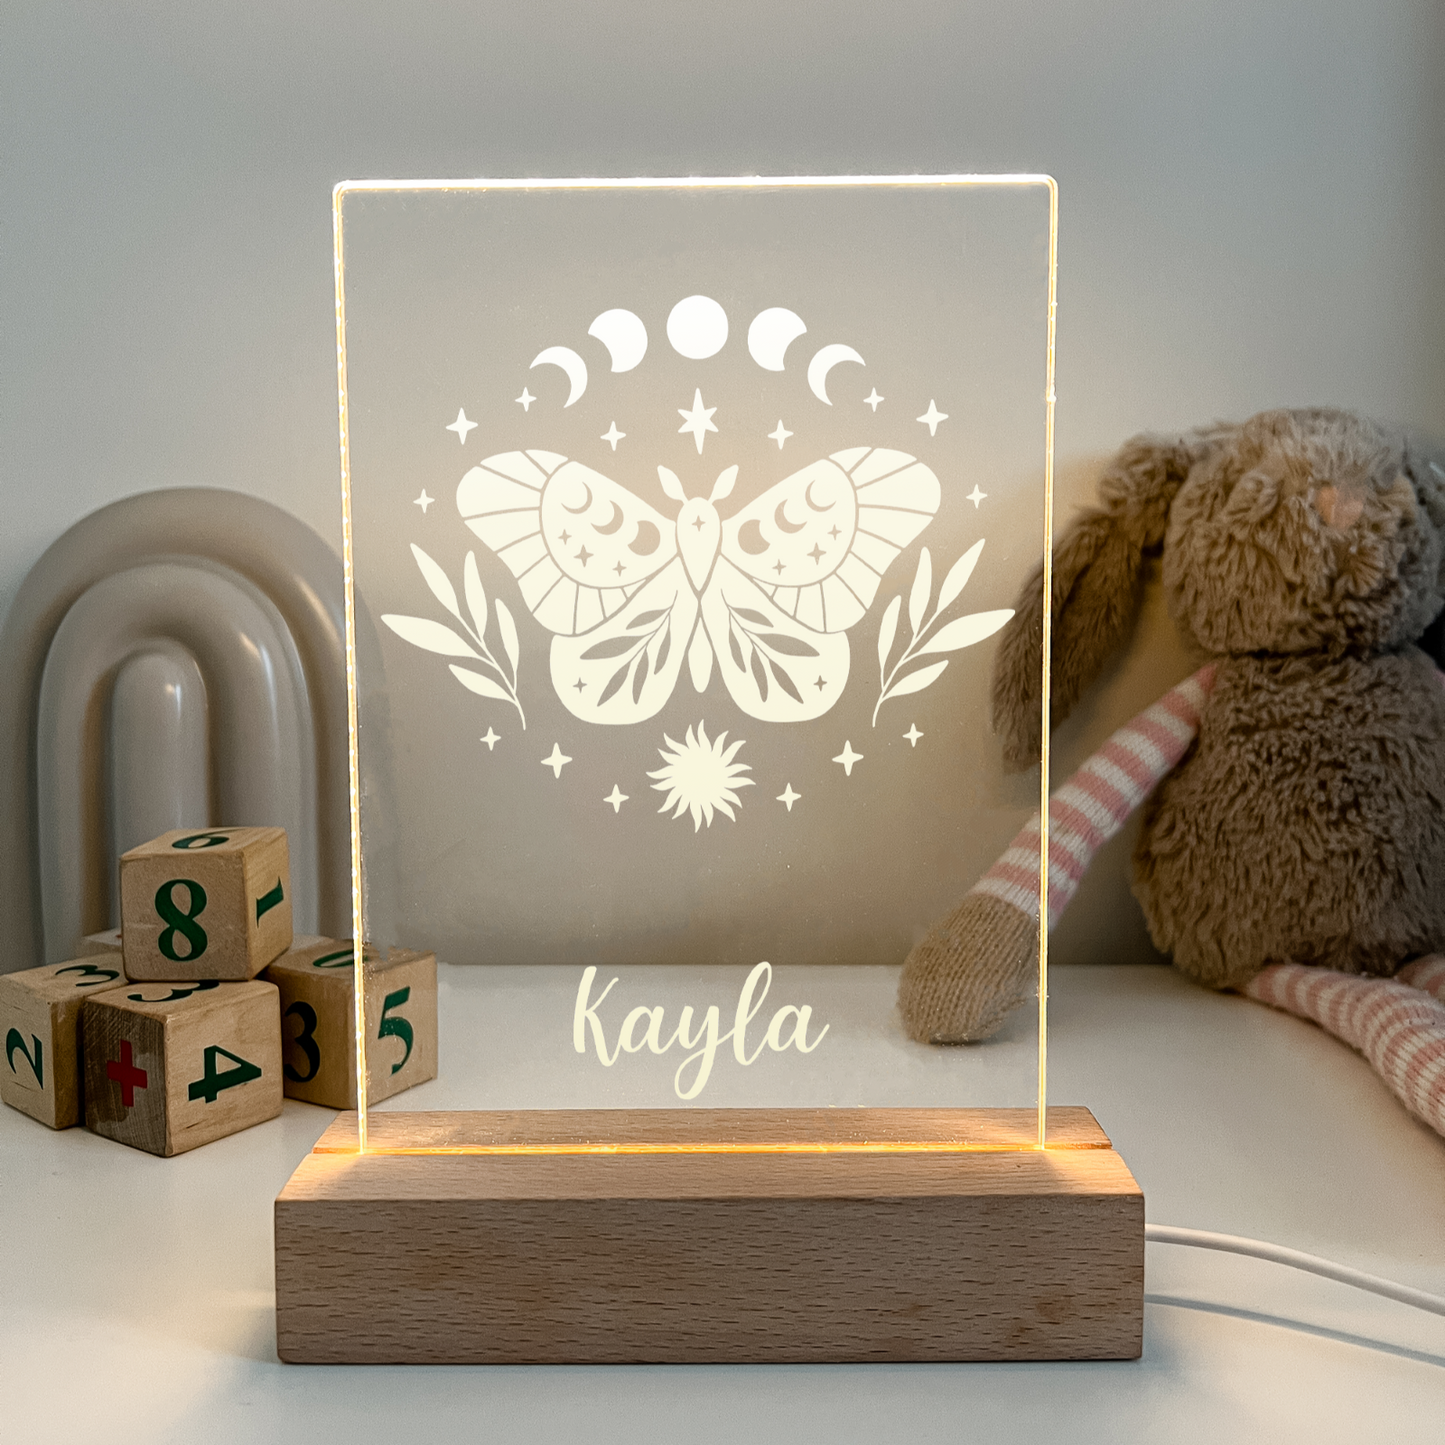 Personalized LED Light Up Desk Lamp Wood Base Stand Girls UNICORN Gift For Her